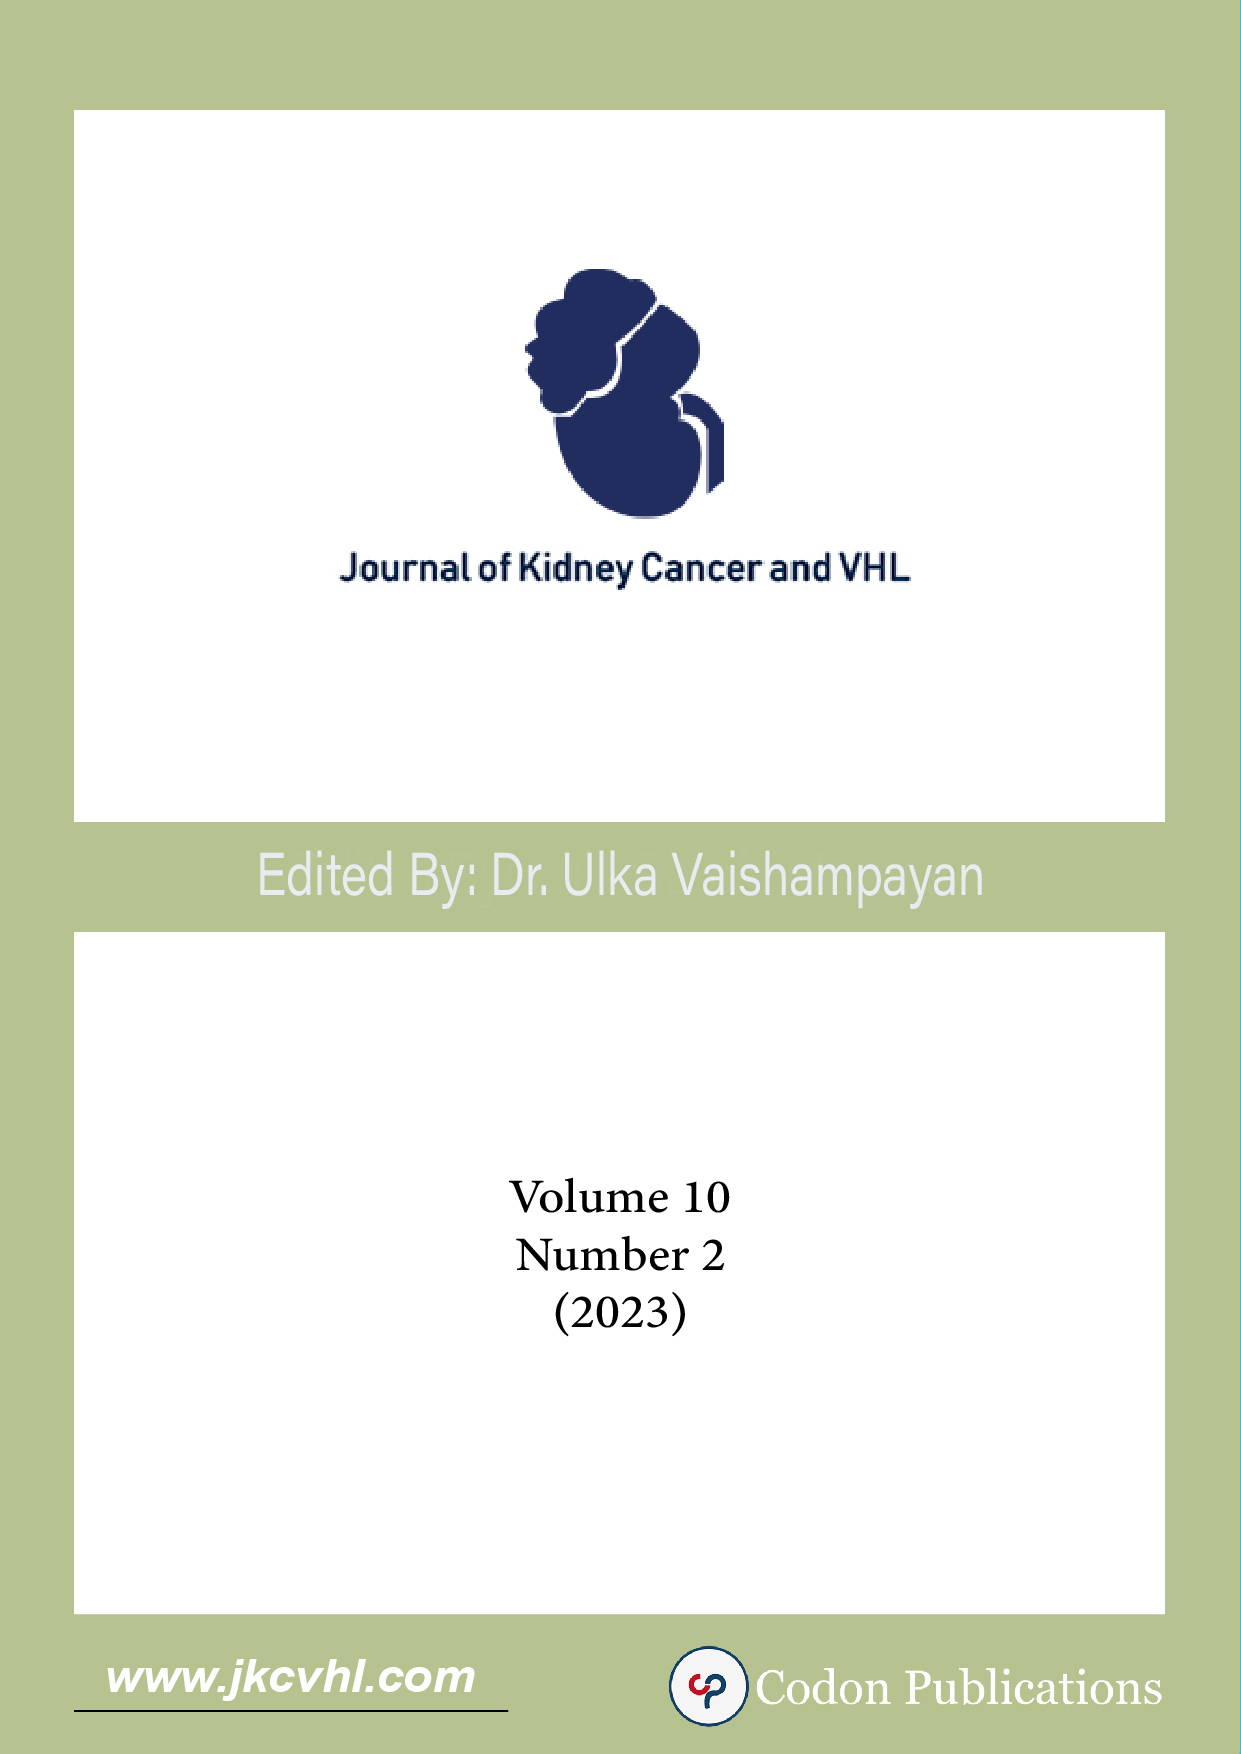 					View Vol. 10 No. 2 (2023): Journal of Kidney Cancer and VHL 
				